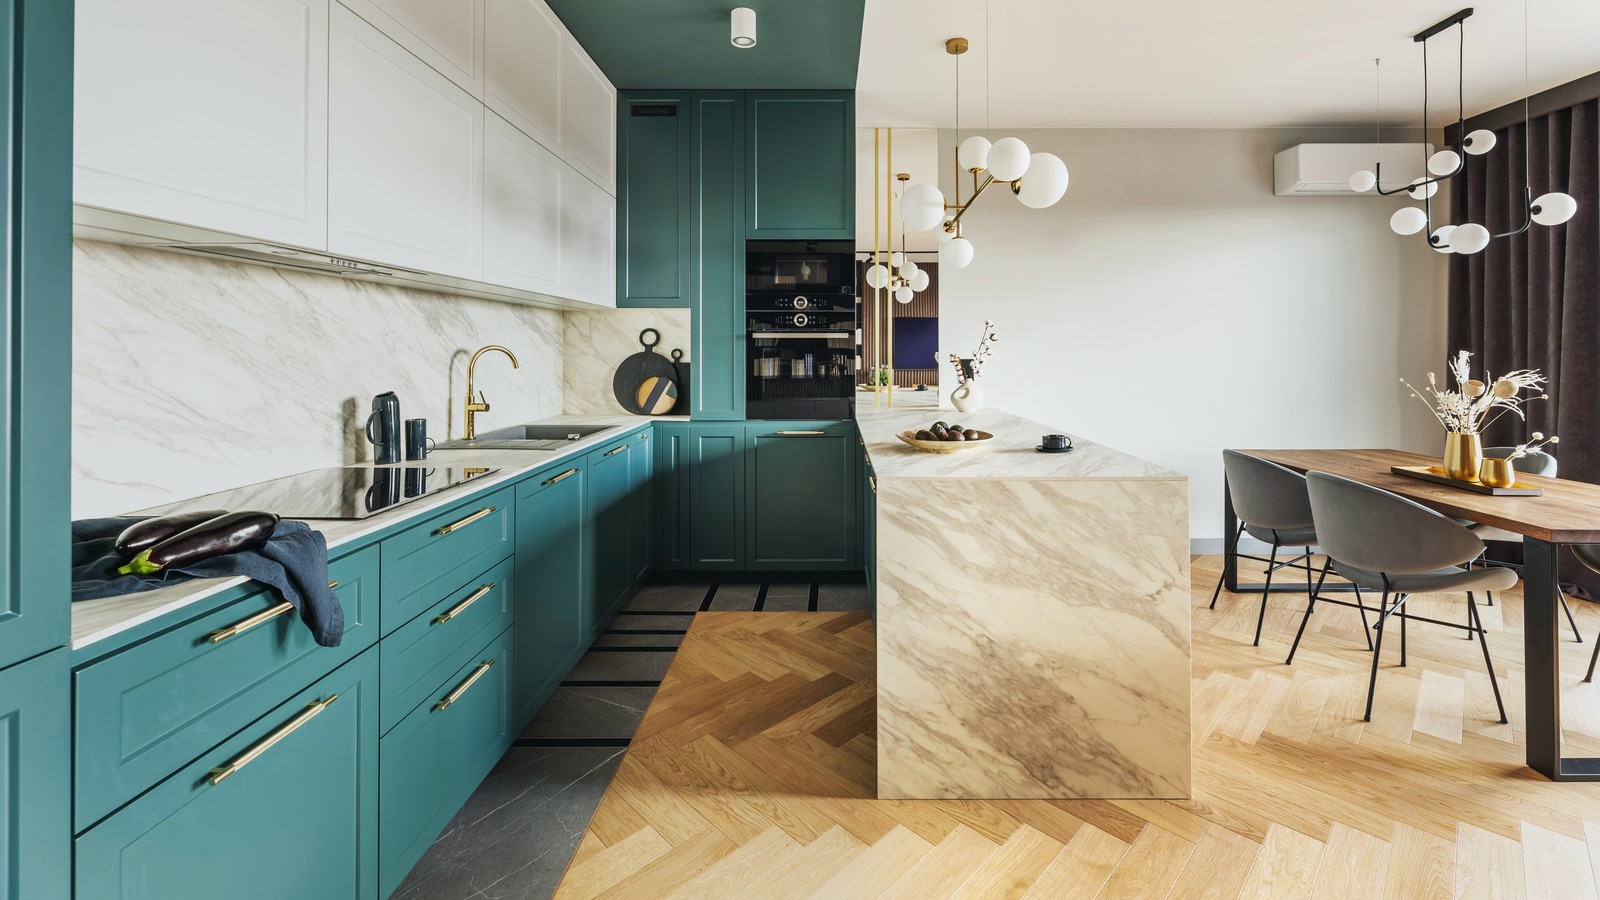 The Importance of Cabinet Clearance in Kitchen Design - CliqStudios